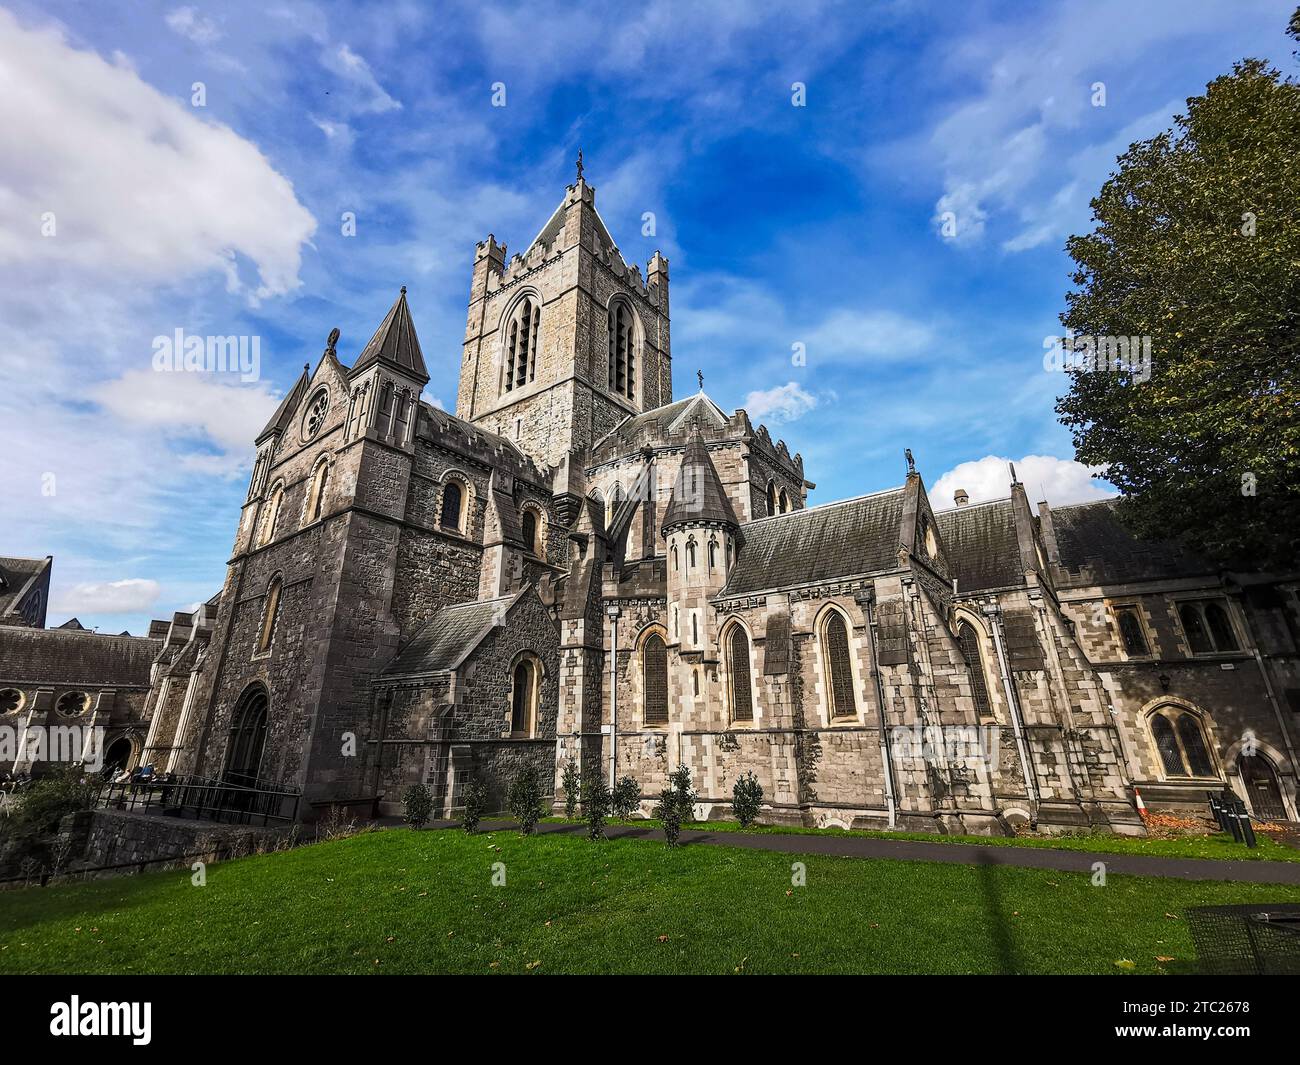 Exterior view of Christchurch Cathedral, in Dublin, Ireland, medieval church built in 11th century. Stock Photo